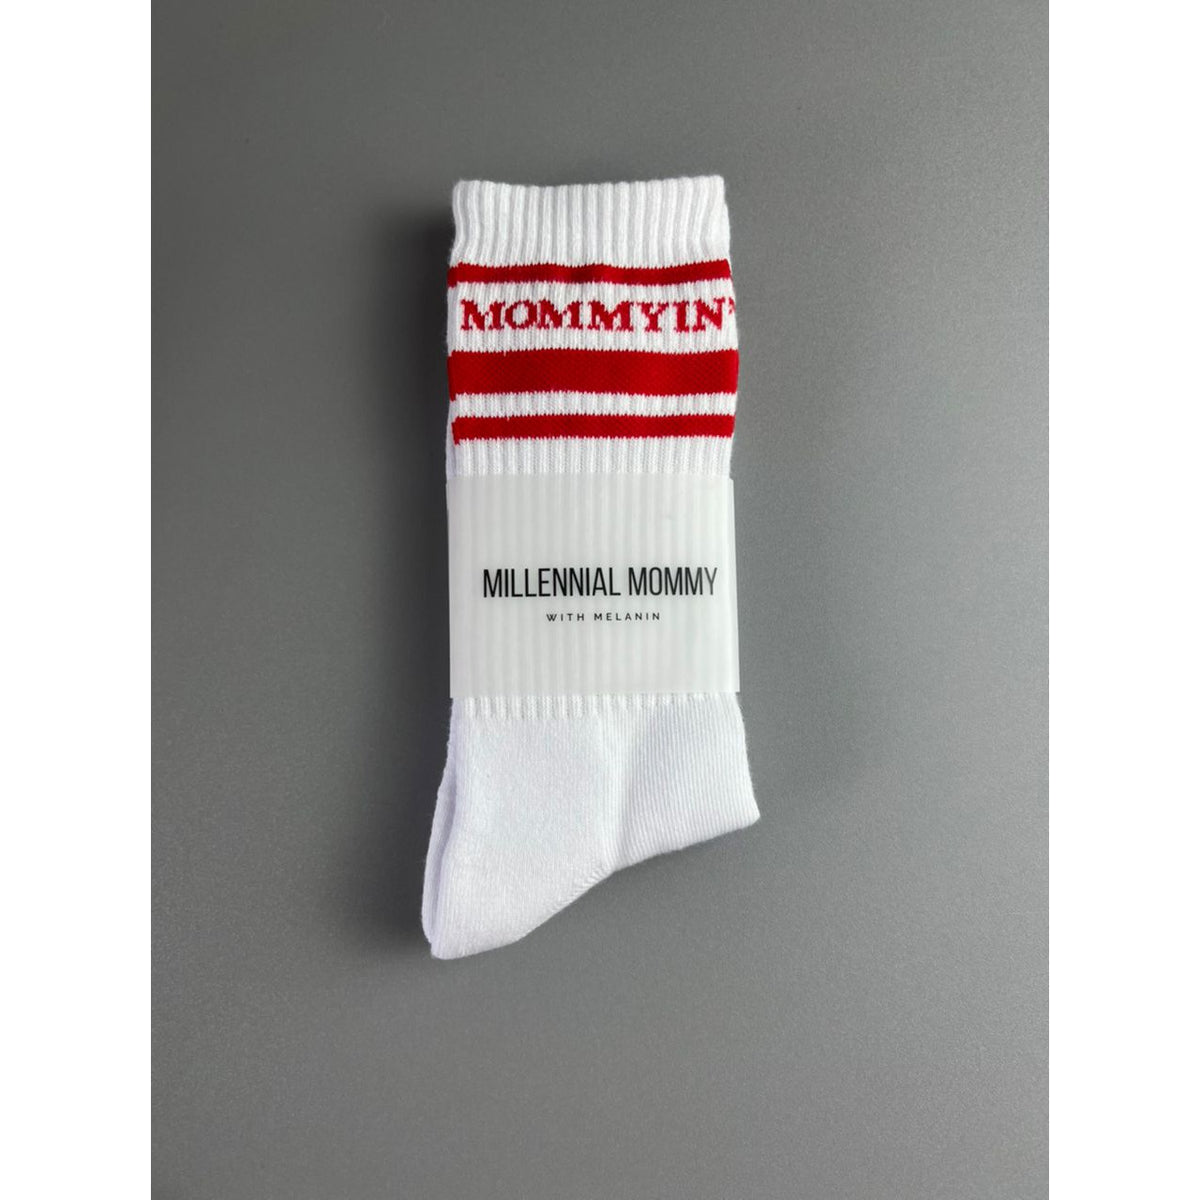 Mommyin Crew Socks- White and Red